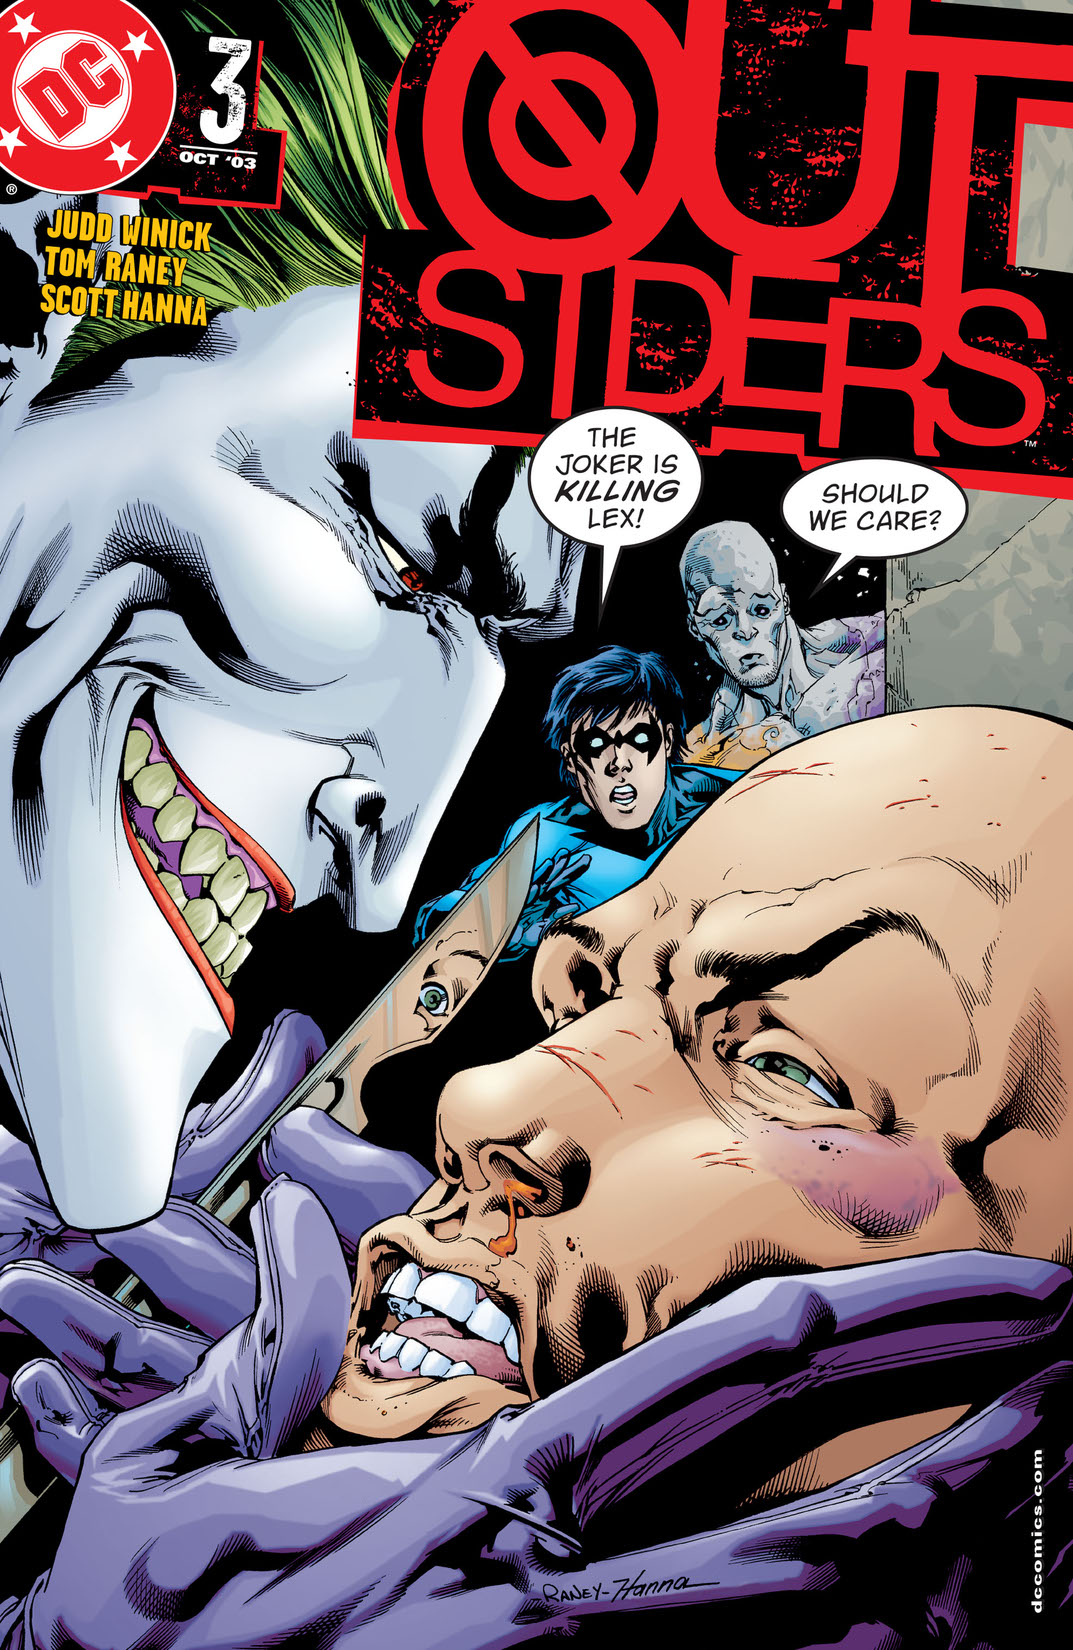 Outsiders (2003-) #3 preview images